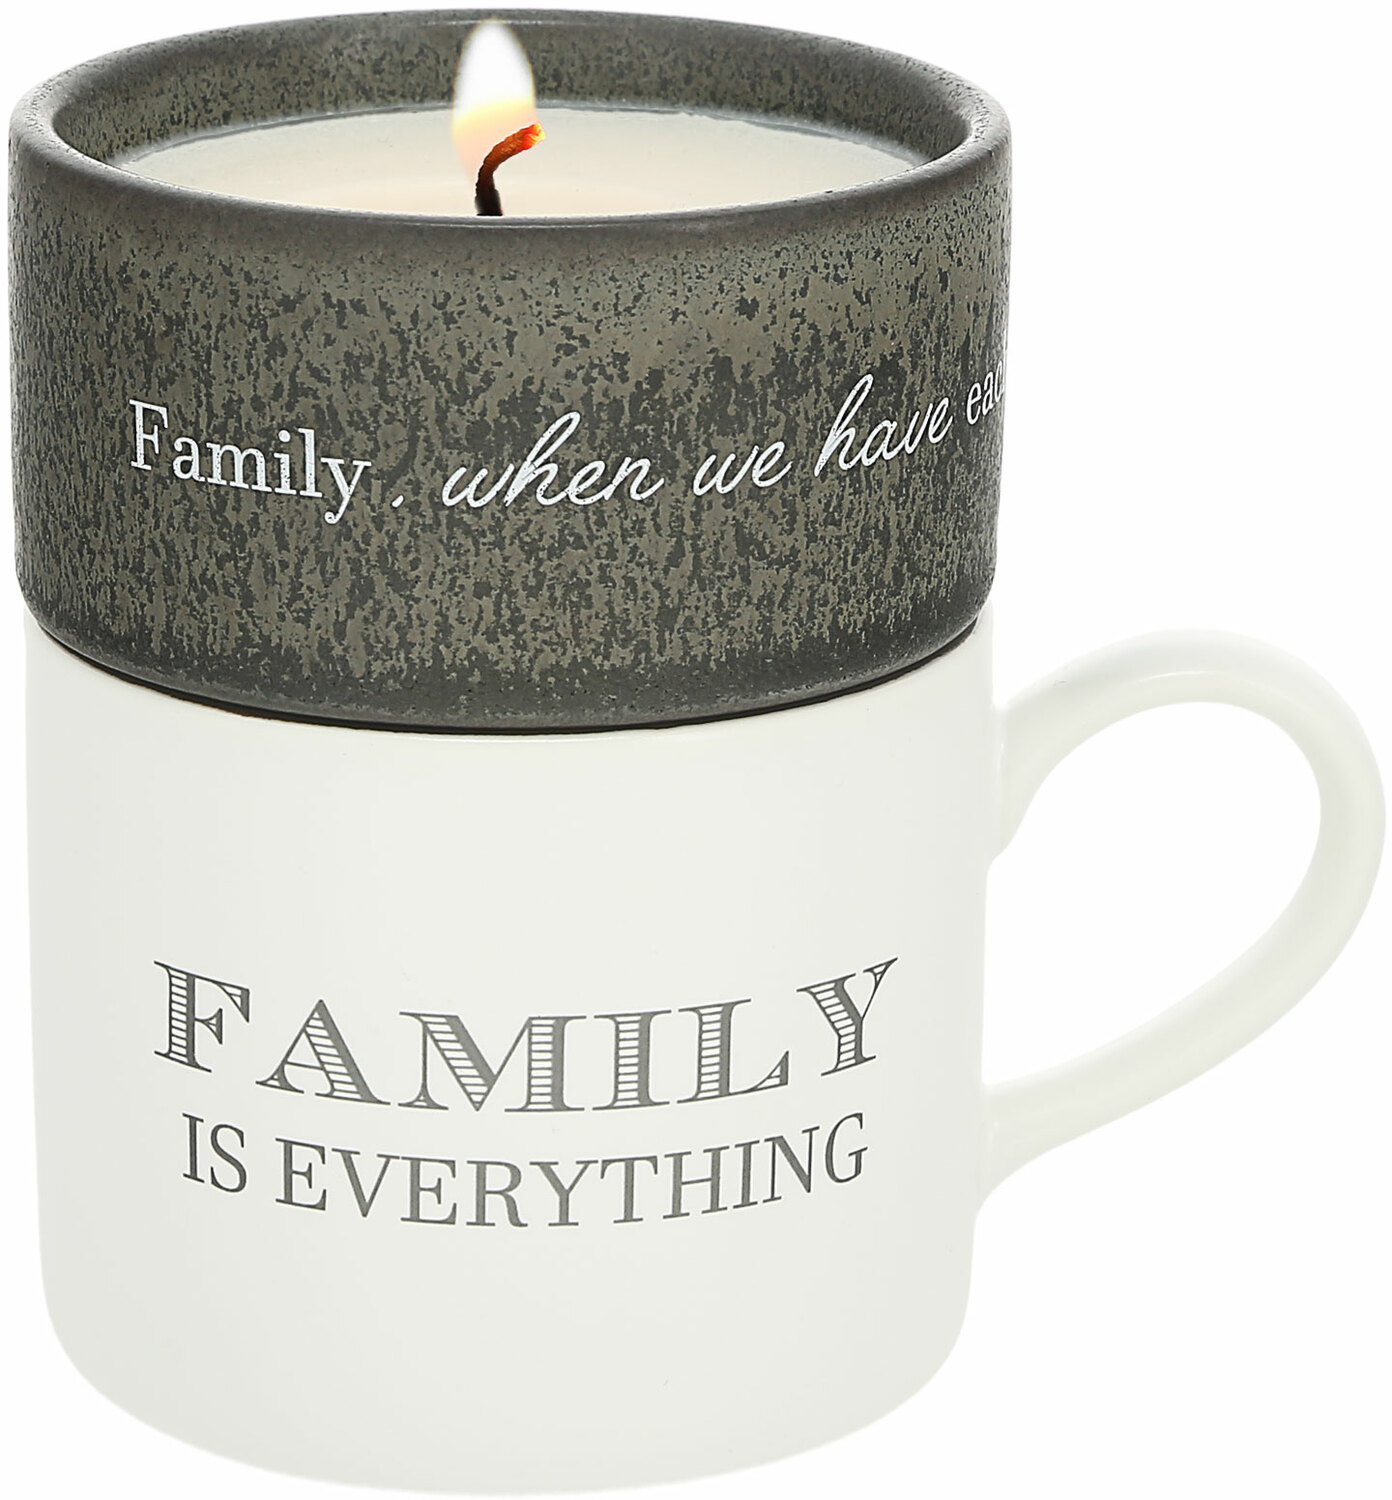 Family by Filled with Warmth - Family - Stacking Mug and Candle Set
100% Soy Wax Scent: Tranquility